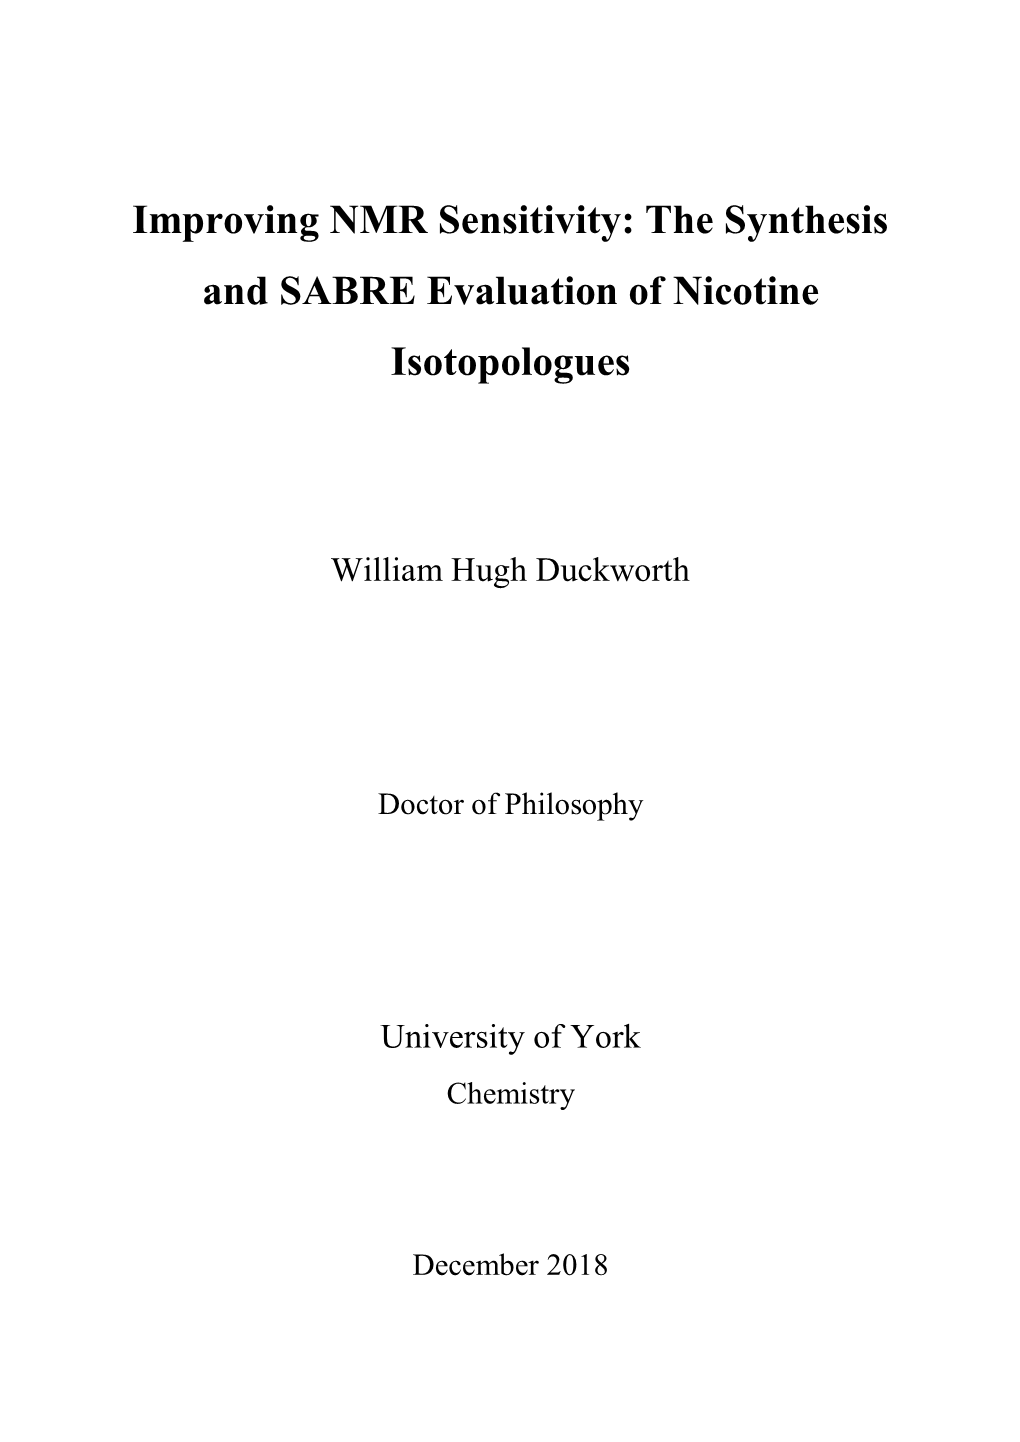 The Synthesis and SABRE Evaluation of Nicotine Isotopologues